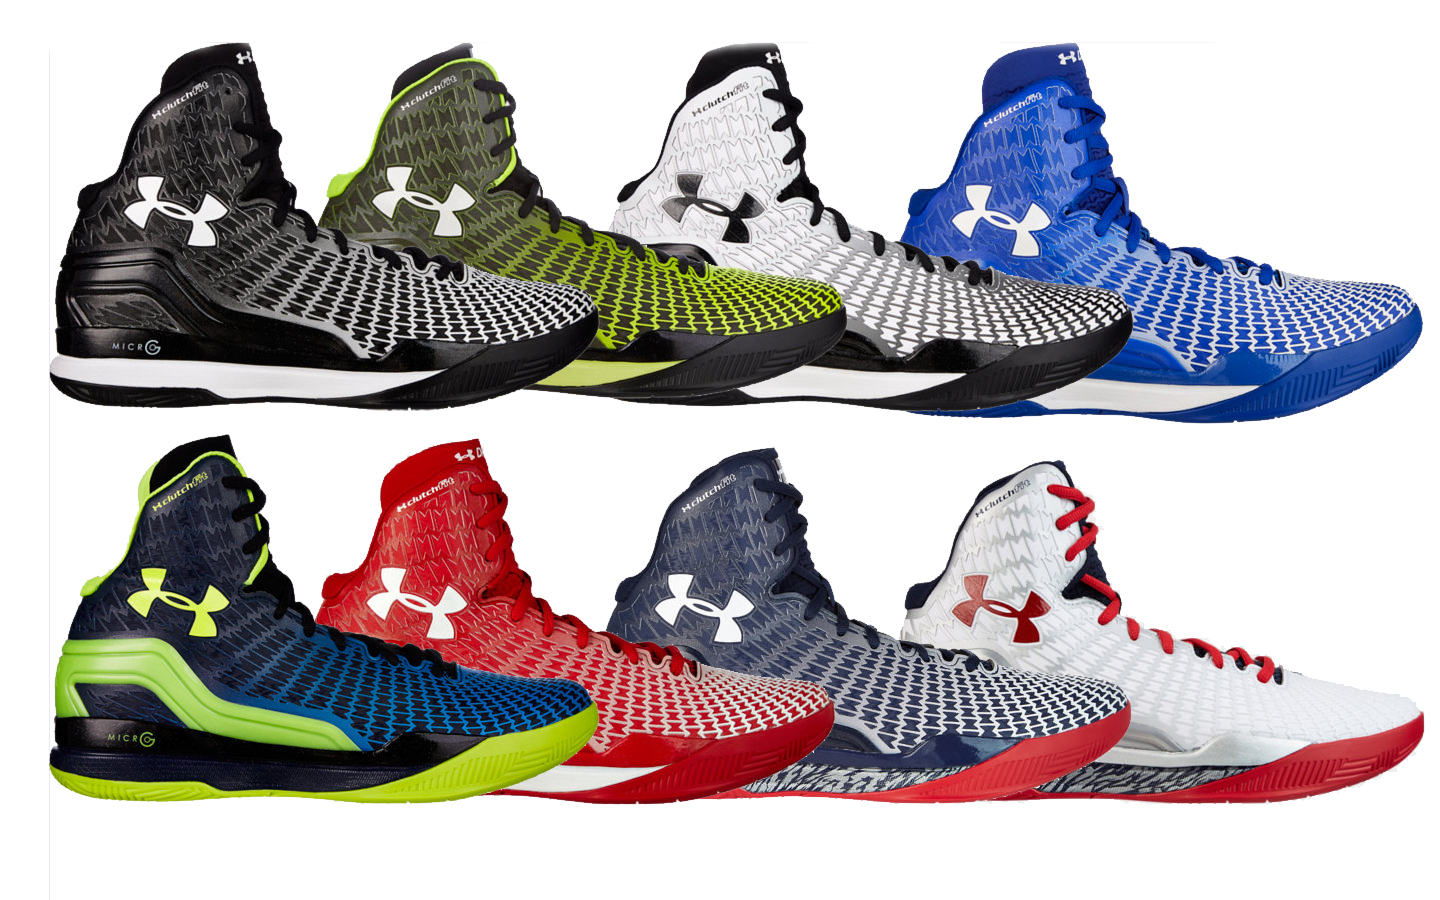 Under Armour Basketball Shoes Blue And White - HD Wallpaper 